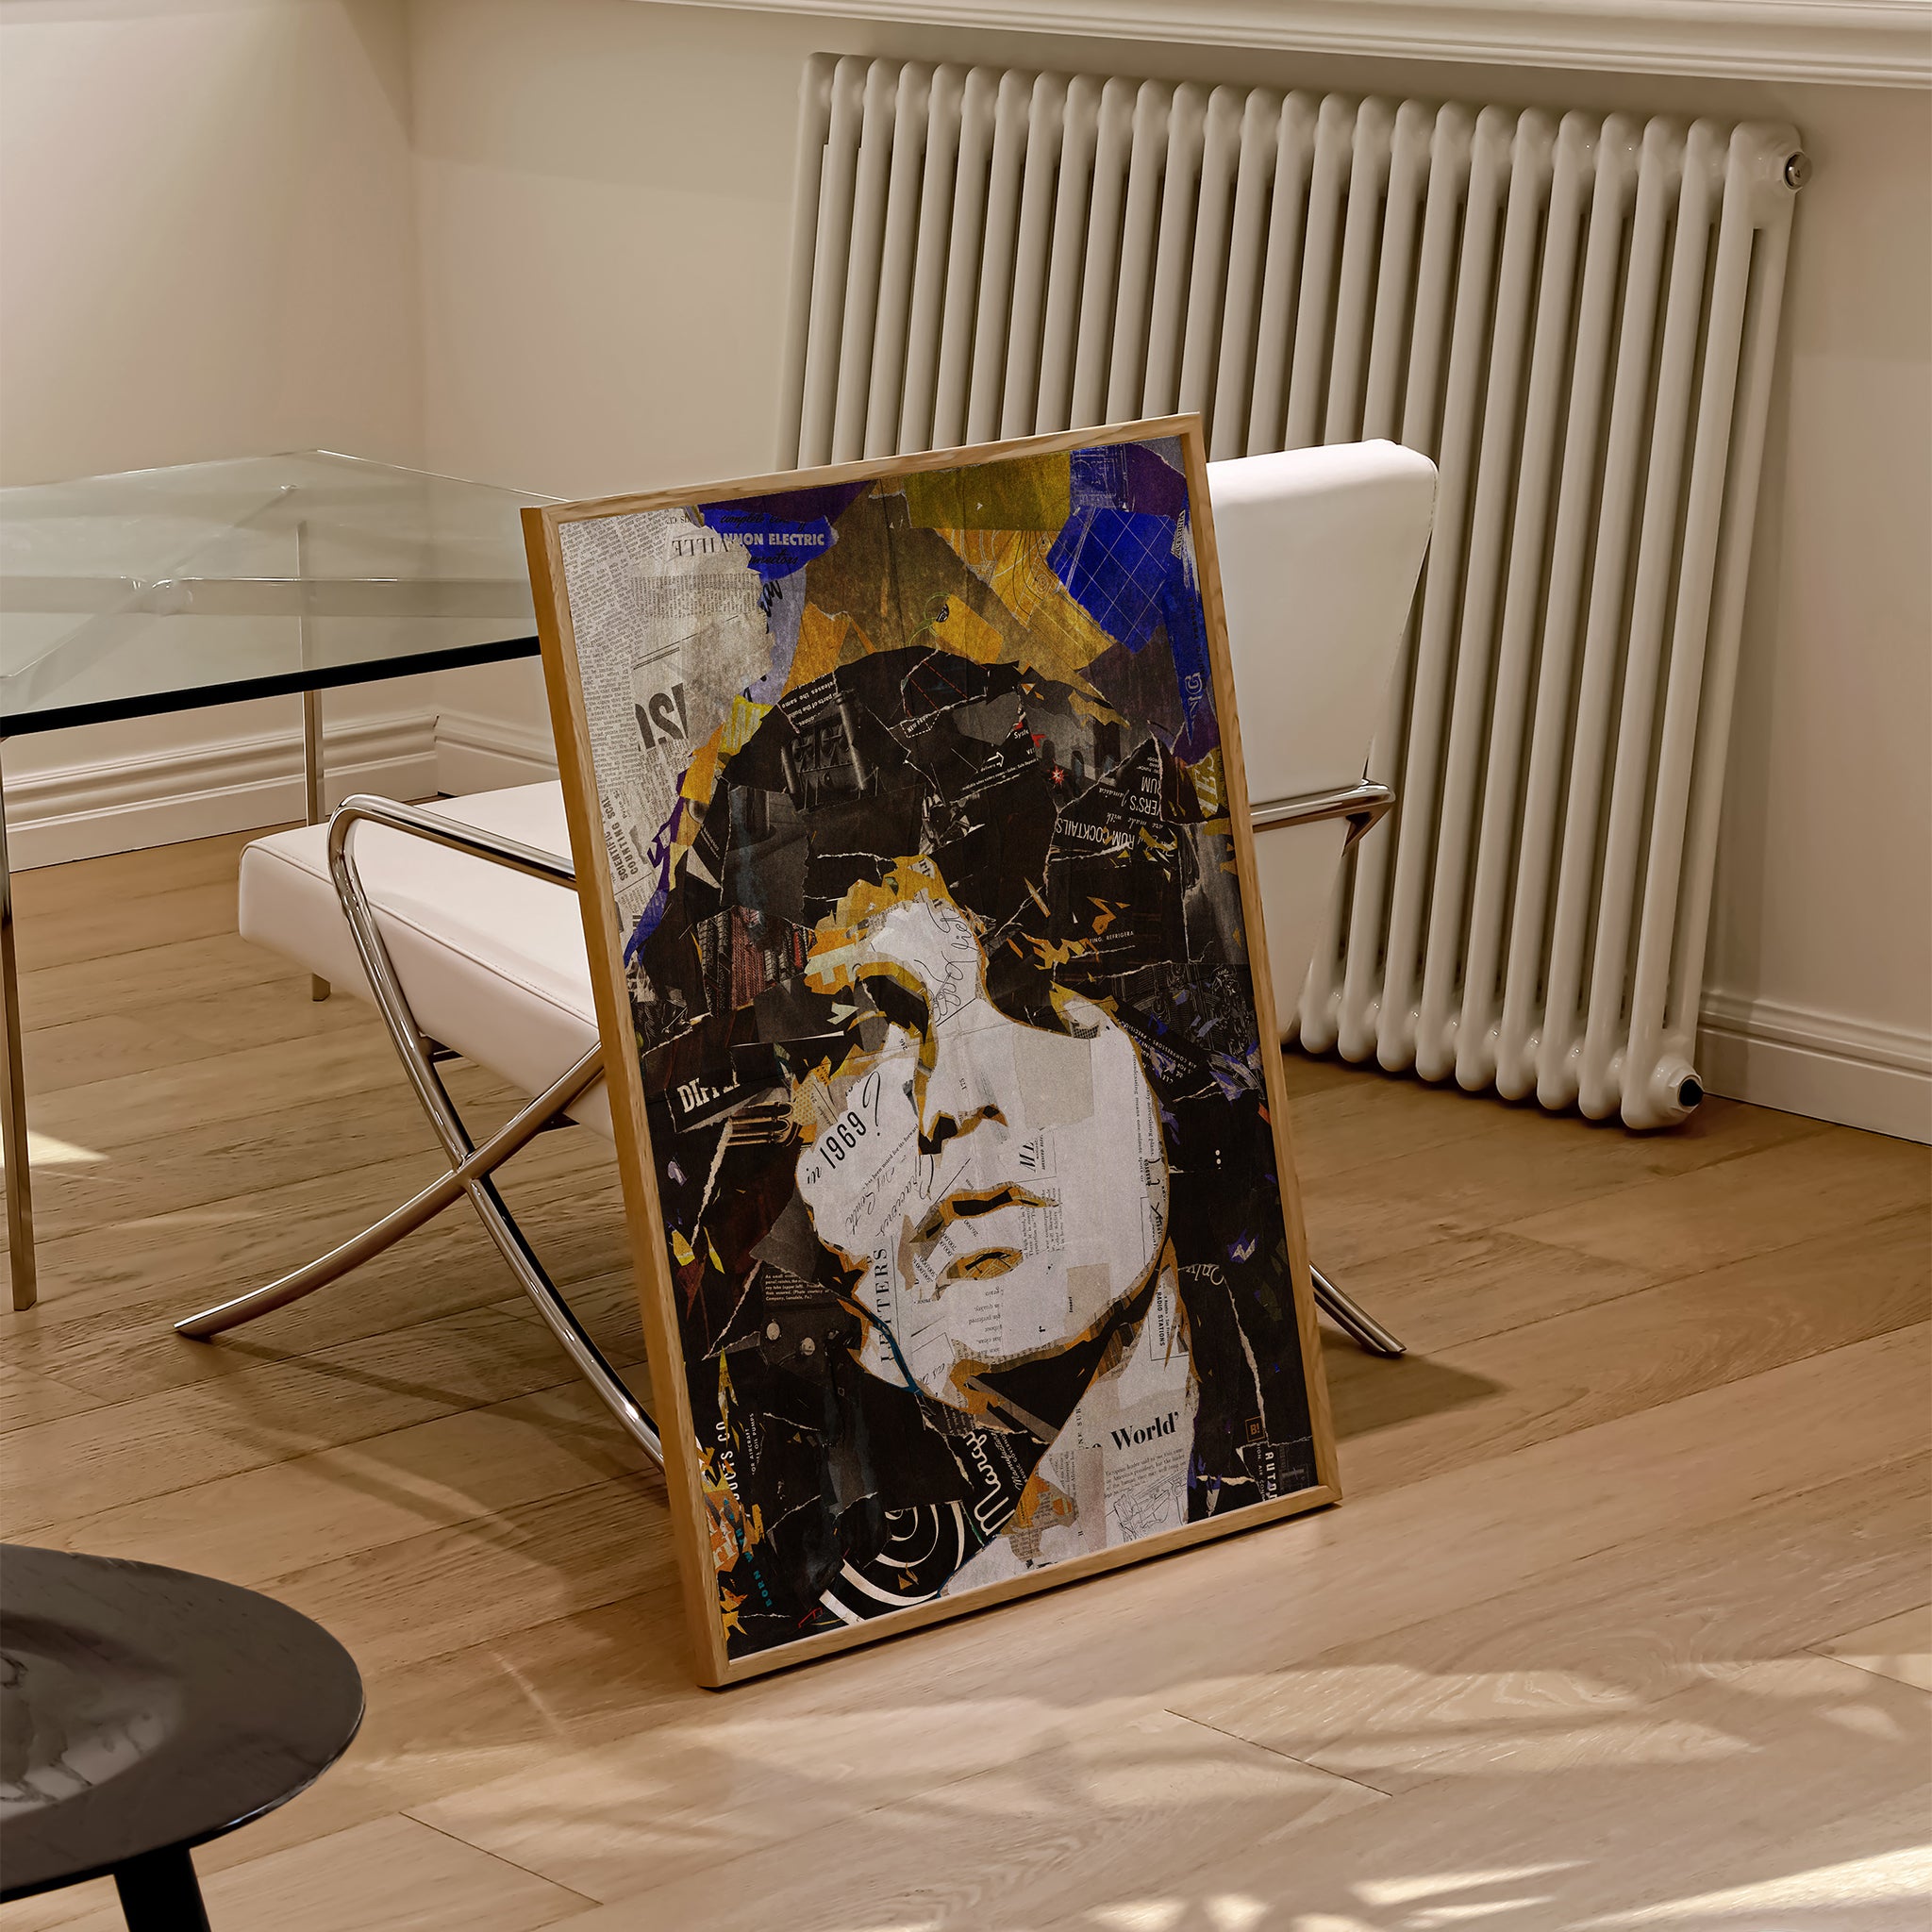 Be inspired by our iconic collage portrait art print of Jim Morrison. This artwork was printed using the giclée process on archival acid-free paper and is presented in a natural oak frame, capturing its timeless beauty in every detail.